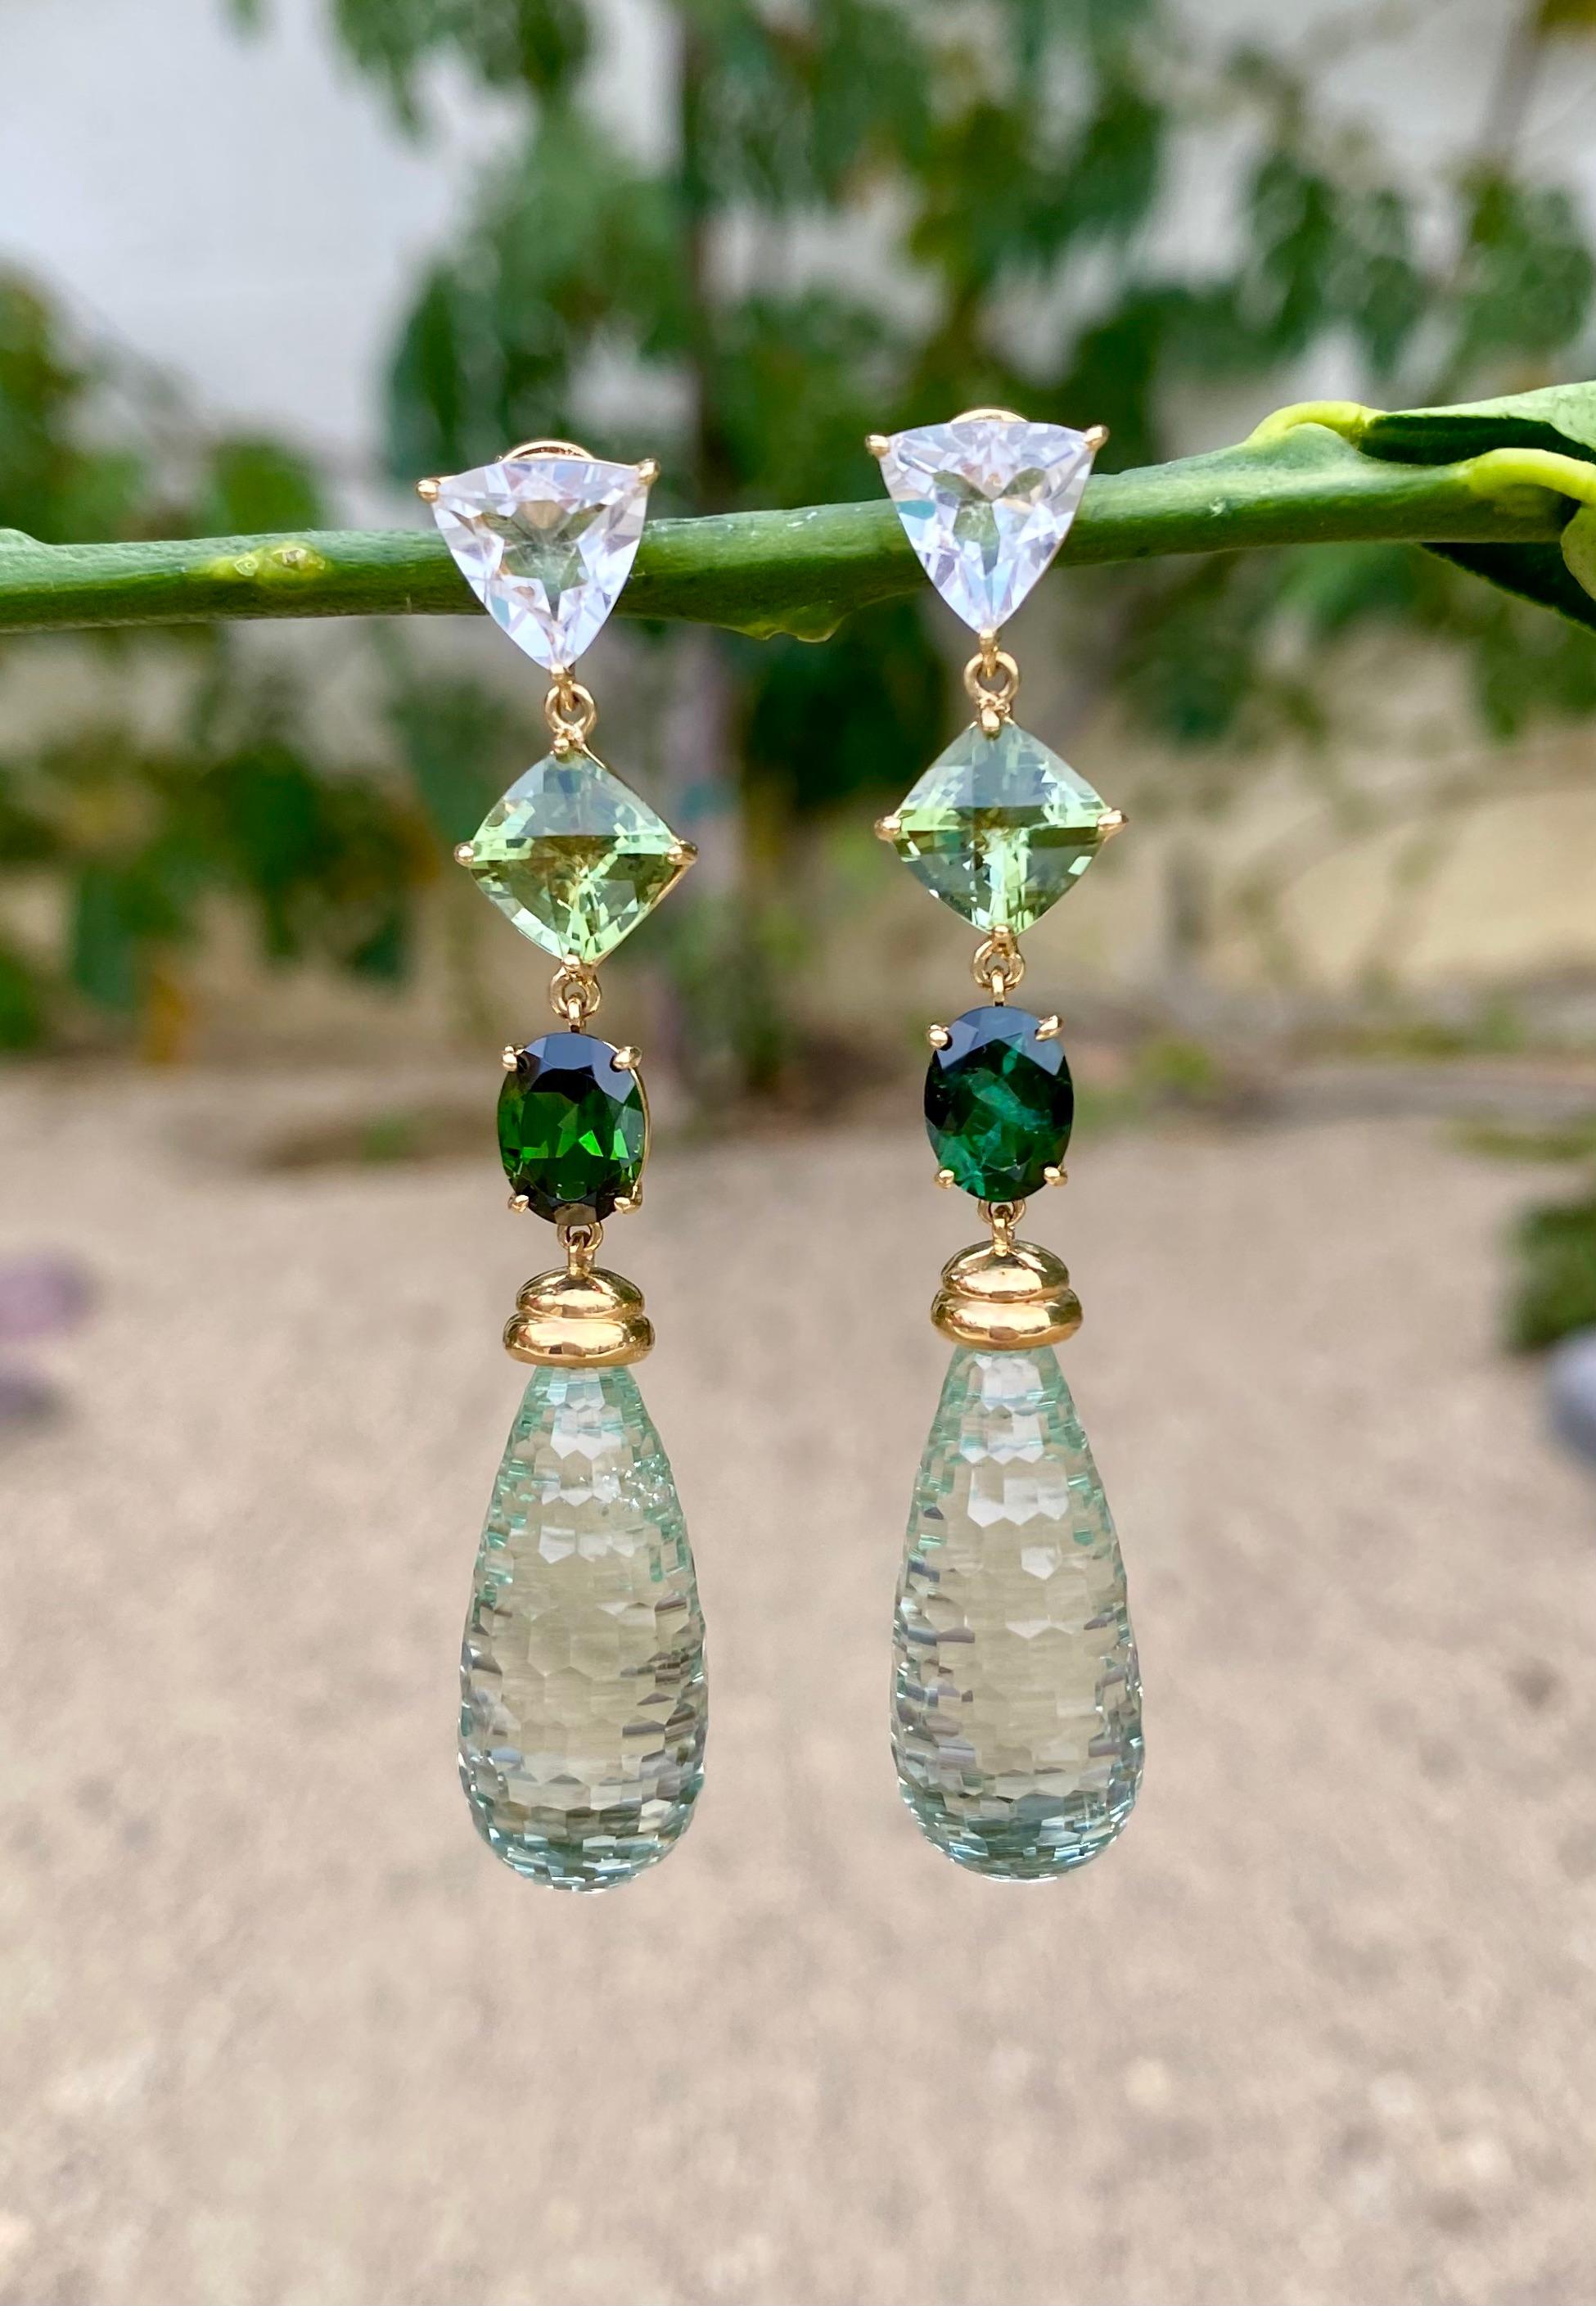 Prasiolite briolette drop earrings with beautiful shades of blue and green tourmalines and white topaz, handcrafted in 18 karat yellow gold.

Gorgeous shades of green are reflected in these stunning one-of-a-kind prasiolite briolette and